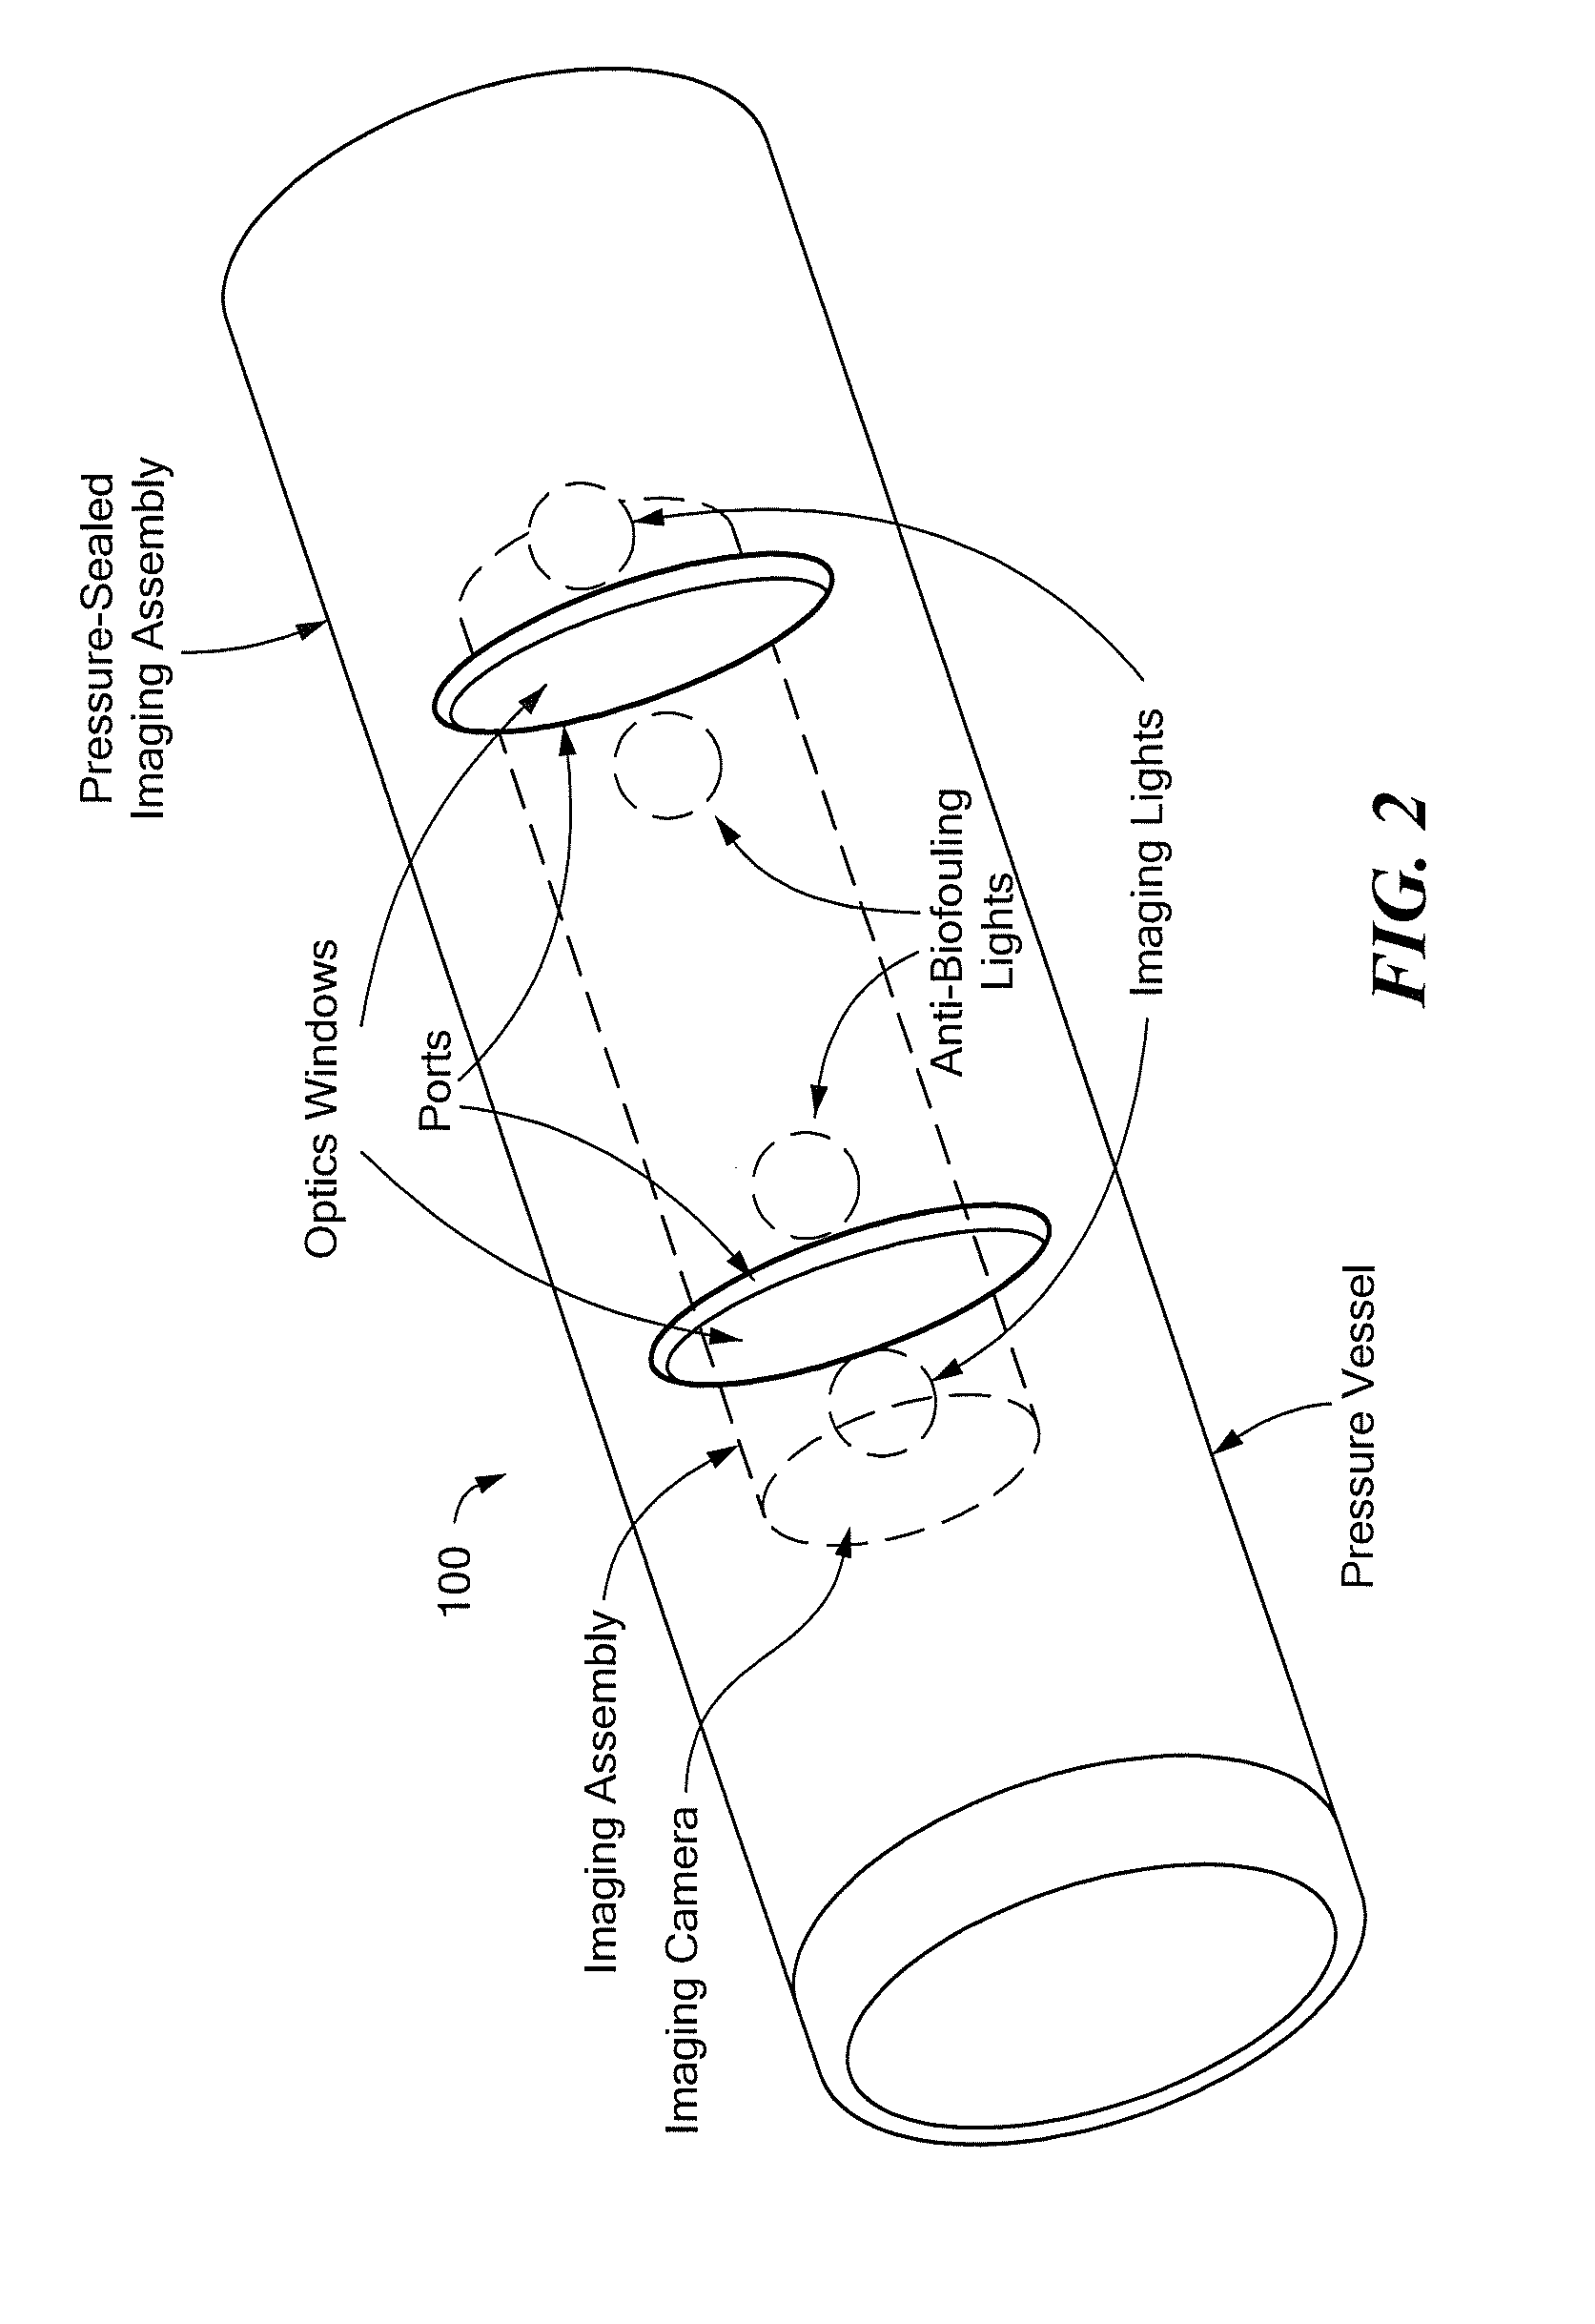 Method and Apparatus for Anti-Biofouling of Optics in Liquid Environments